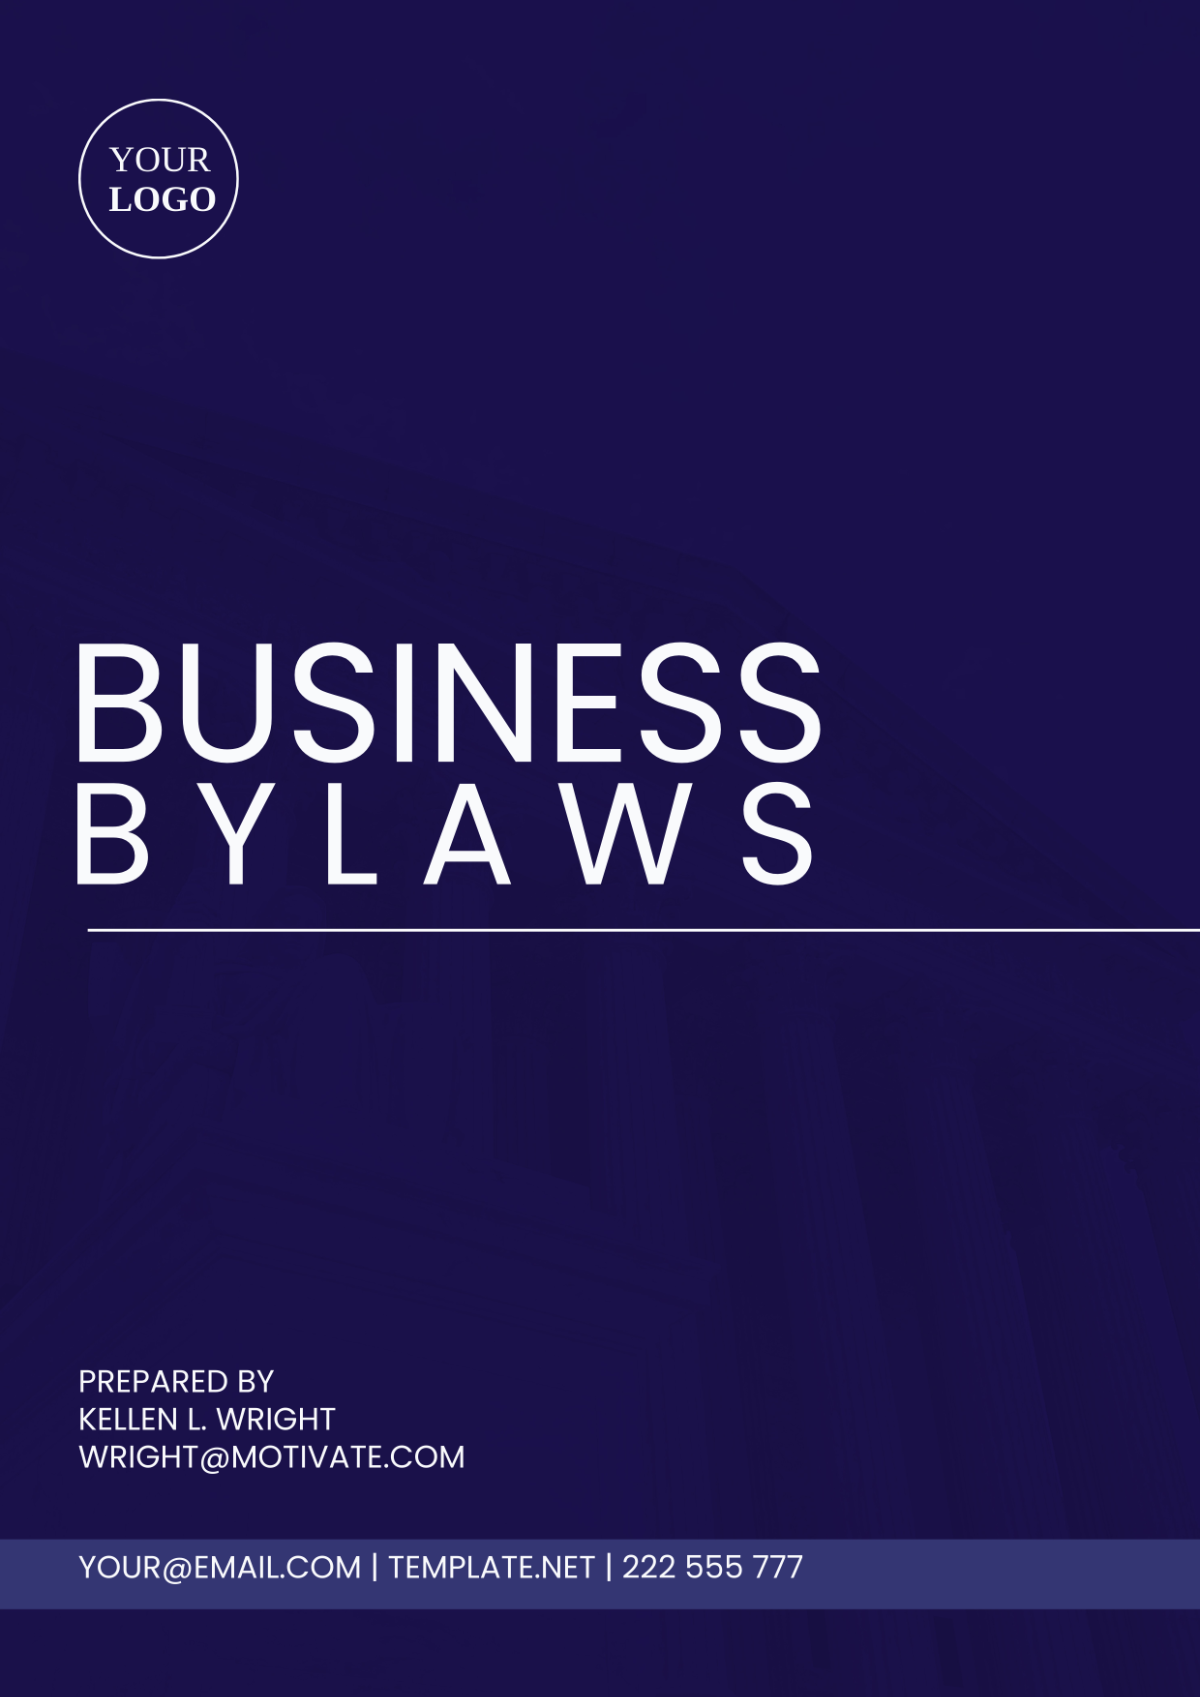 Business Bylaws Template